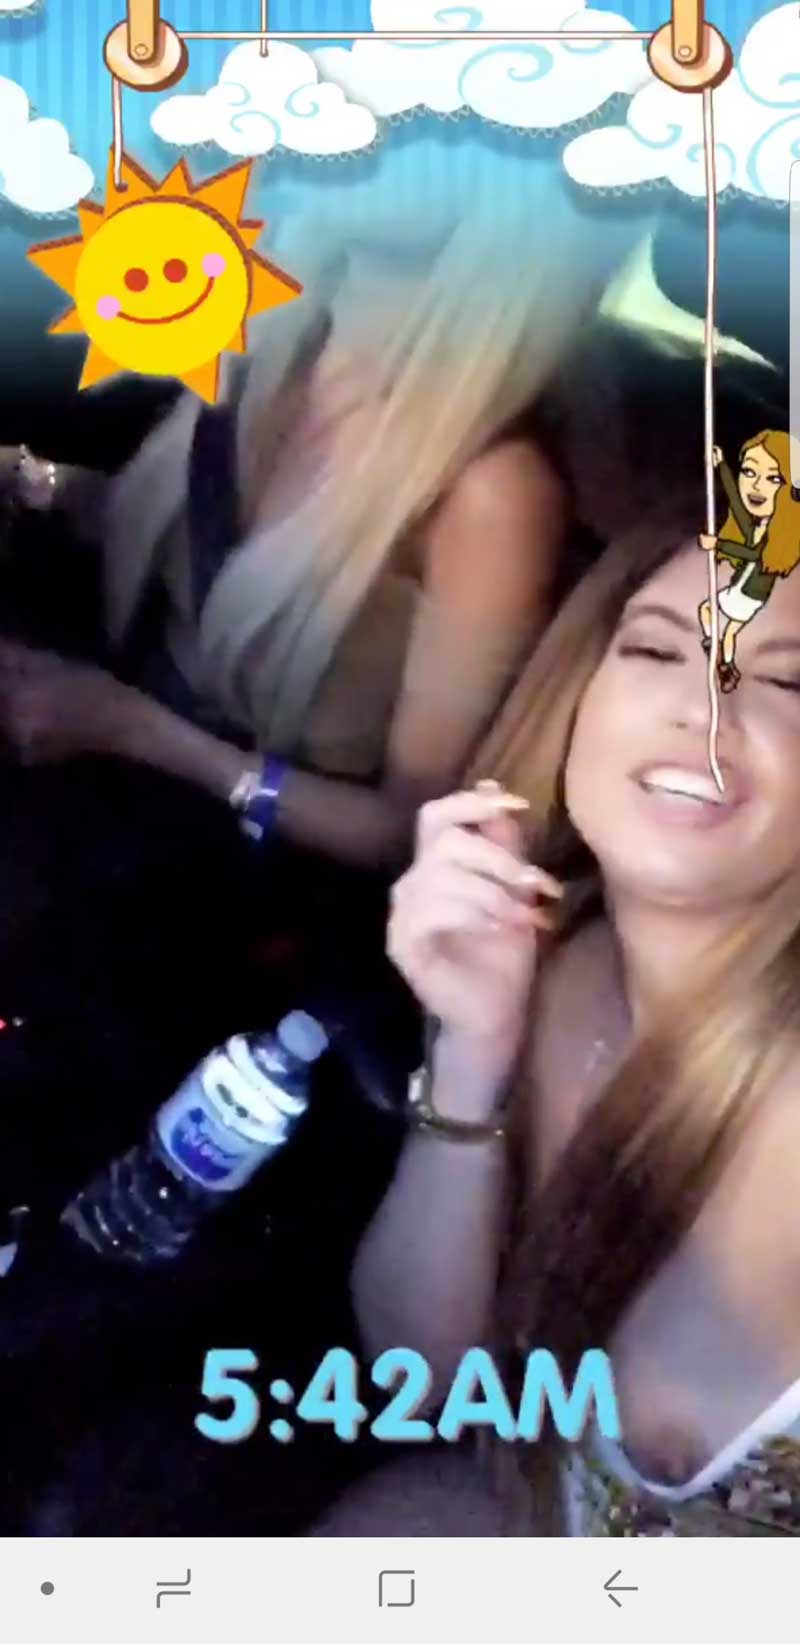 Chanel West Coast Slips a Nip on her Snapchat - Taxi Driver ...